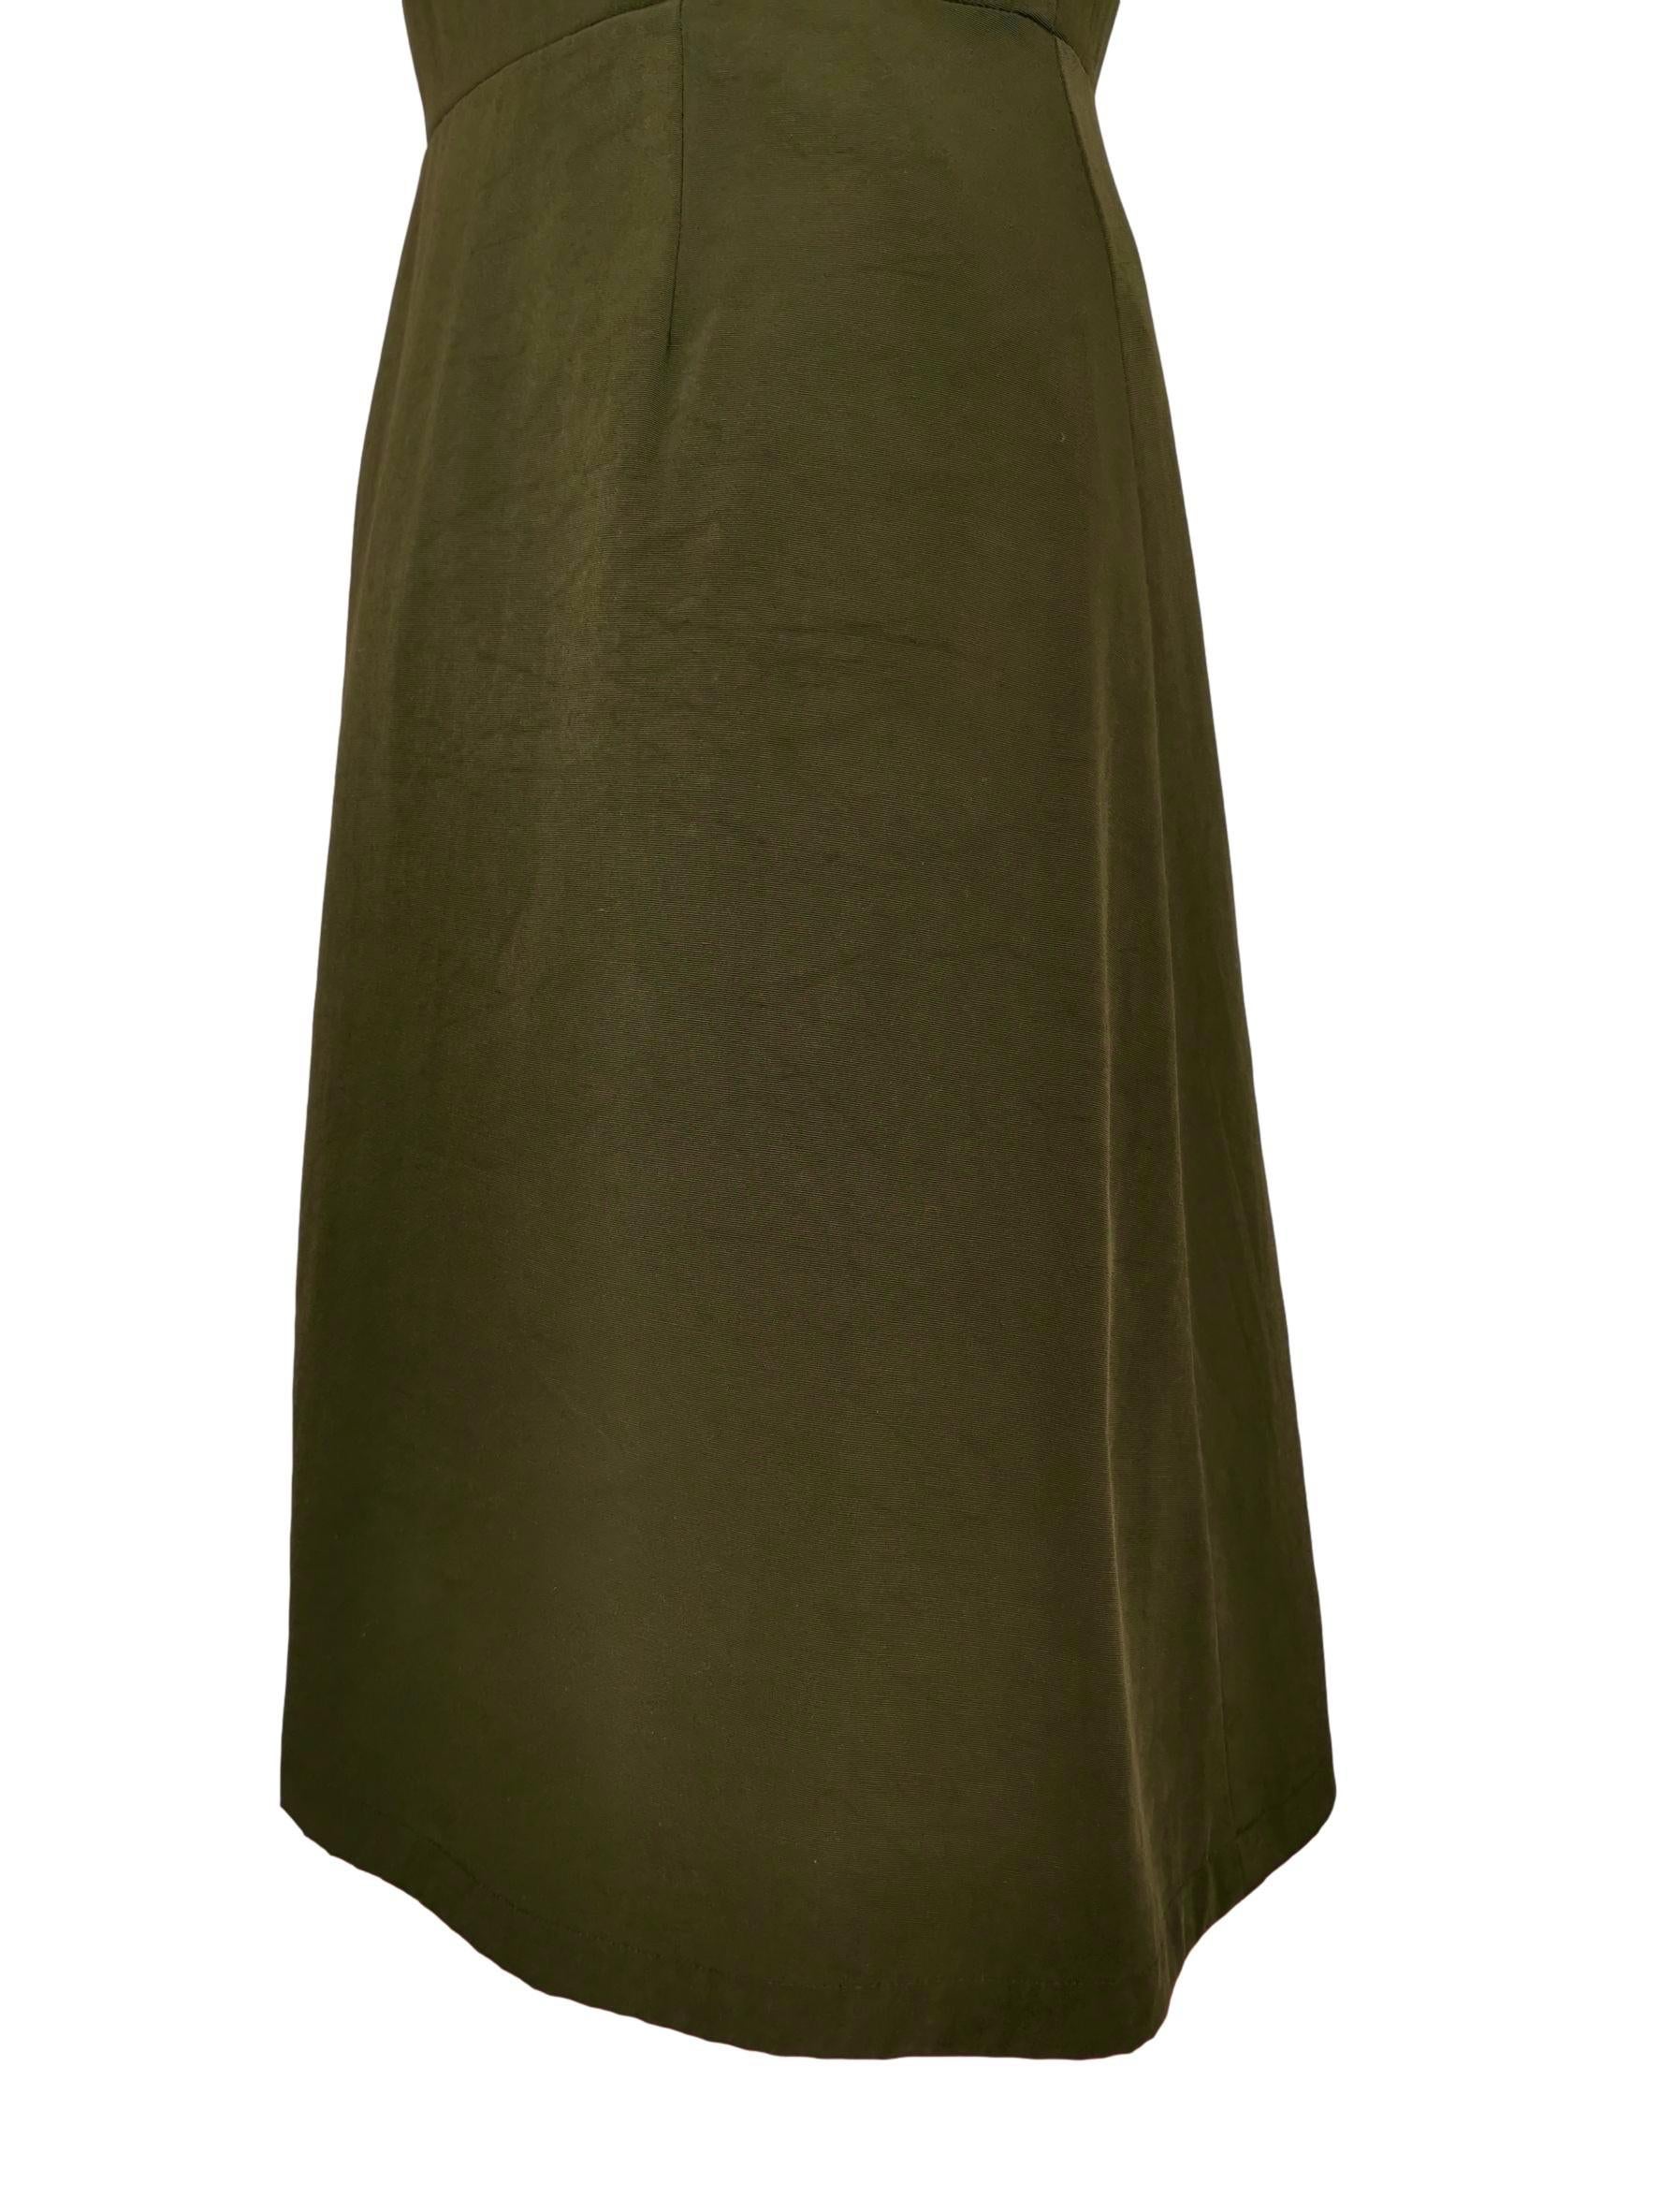 Comme des Garcons Army Green Dress AD 1999 In Excellent Condition For Sale In Bath, GB